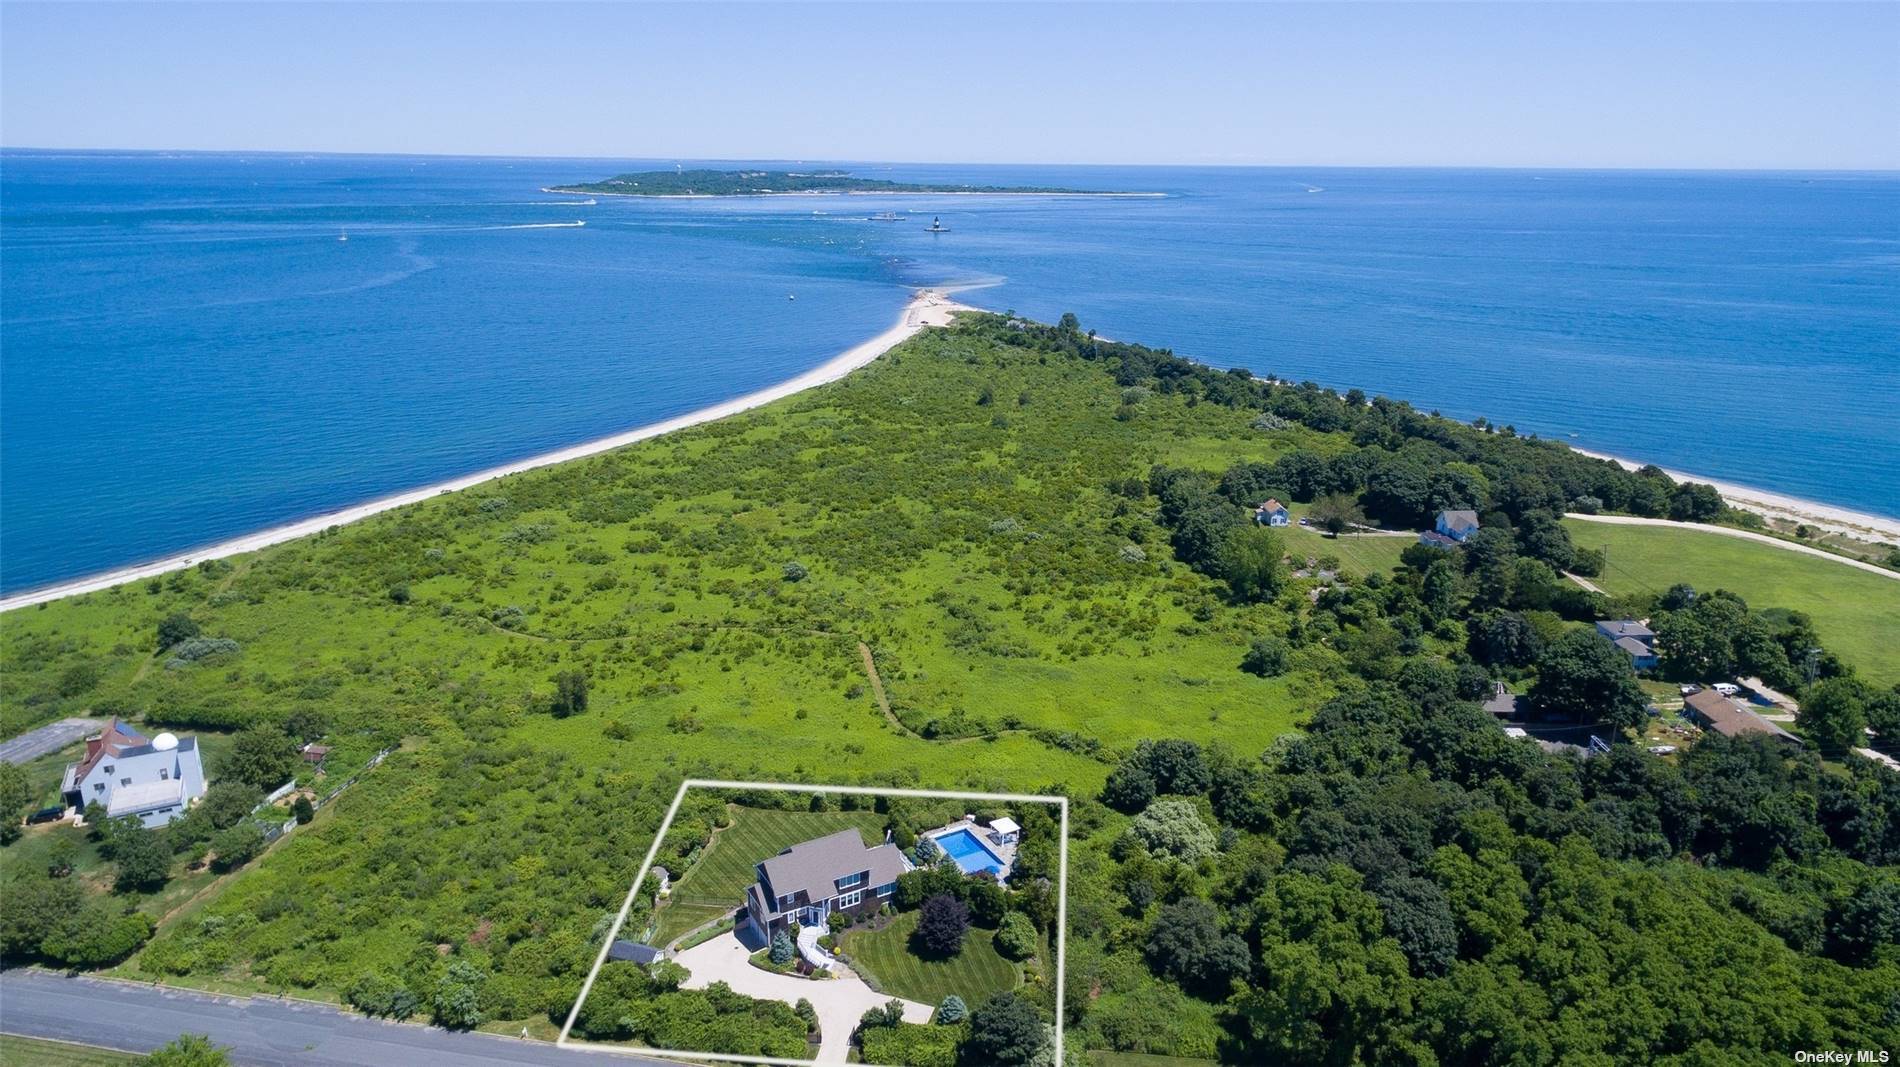 Experience breathtaking views of Long Island Sound and Orient Point County Park from this spacious open concept home.